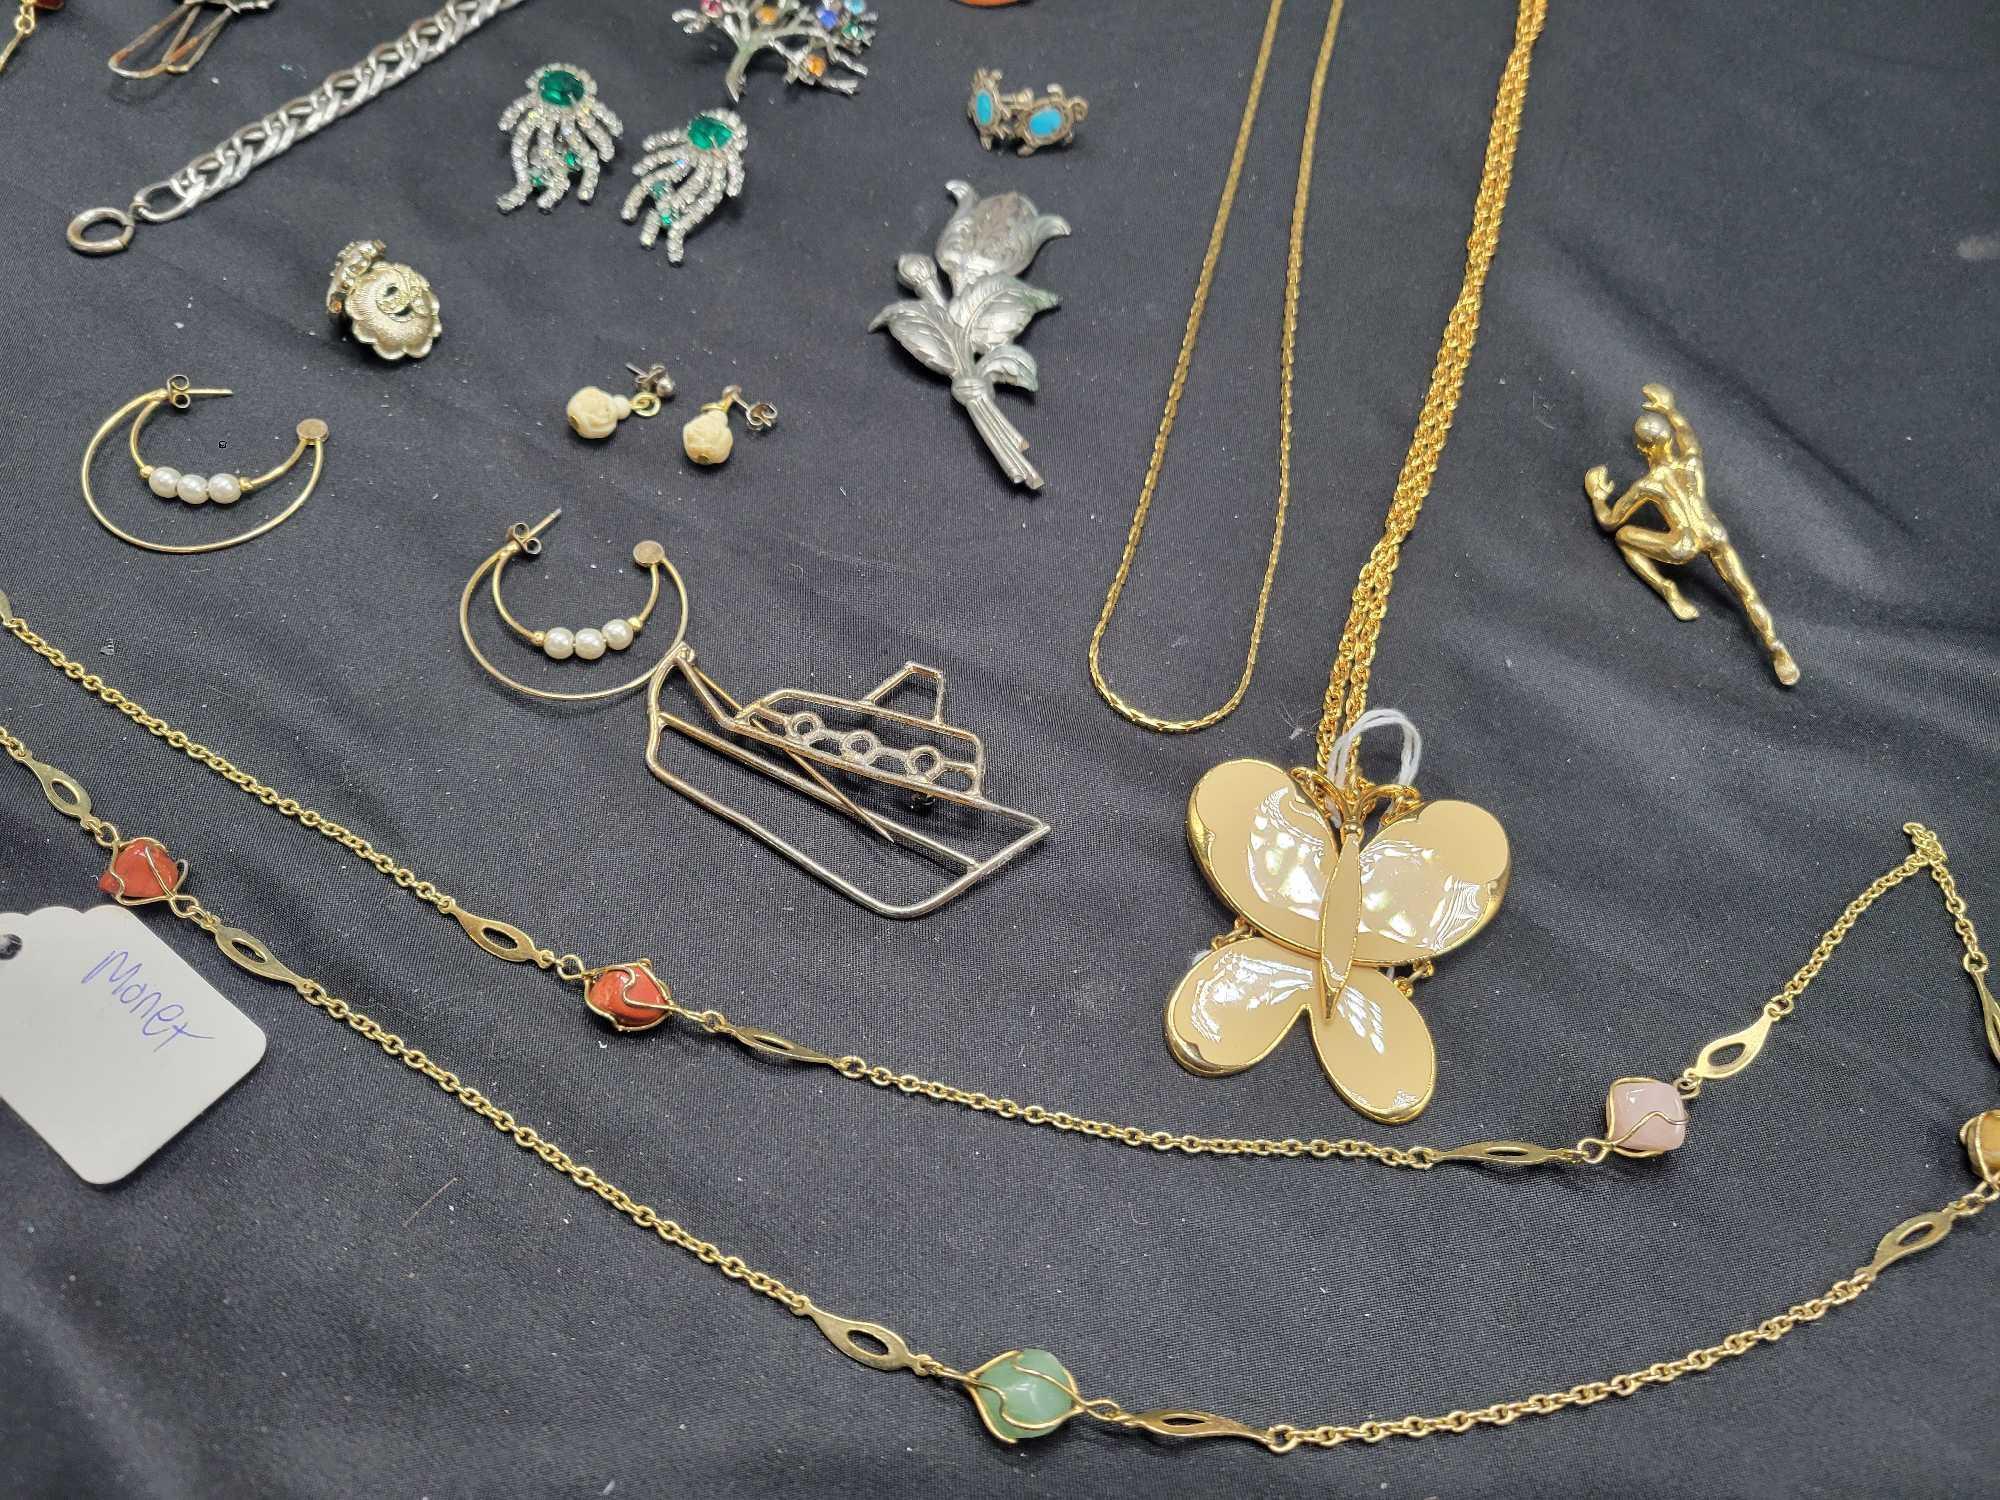 Nice lot of vintage costume jewelry necklaces, earnings and more